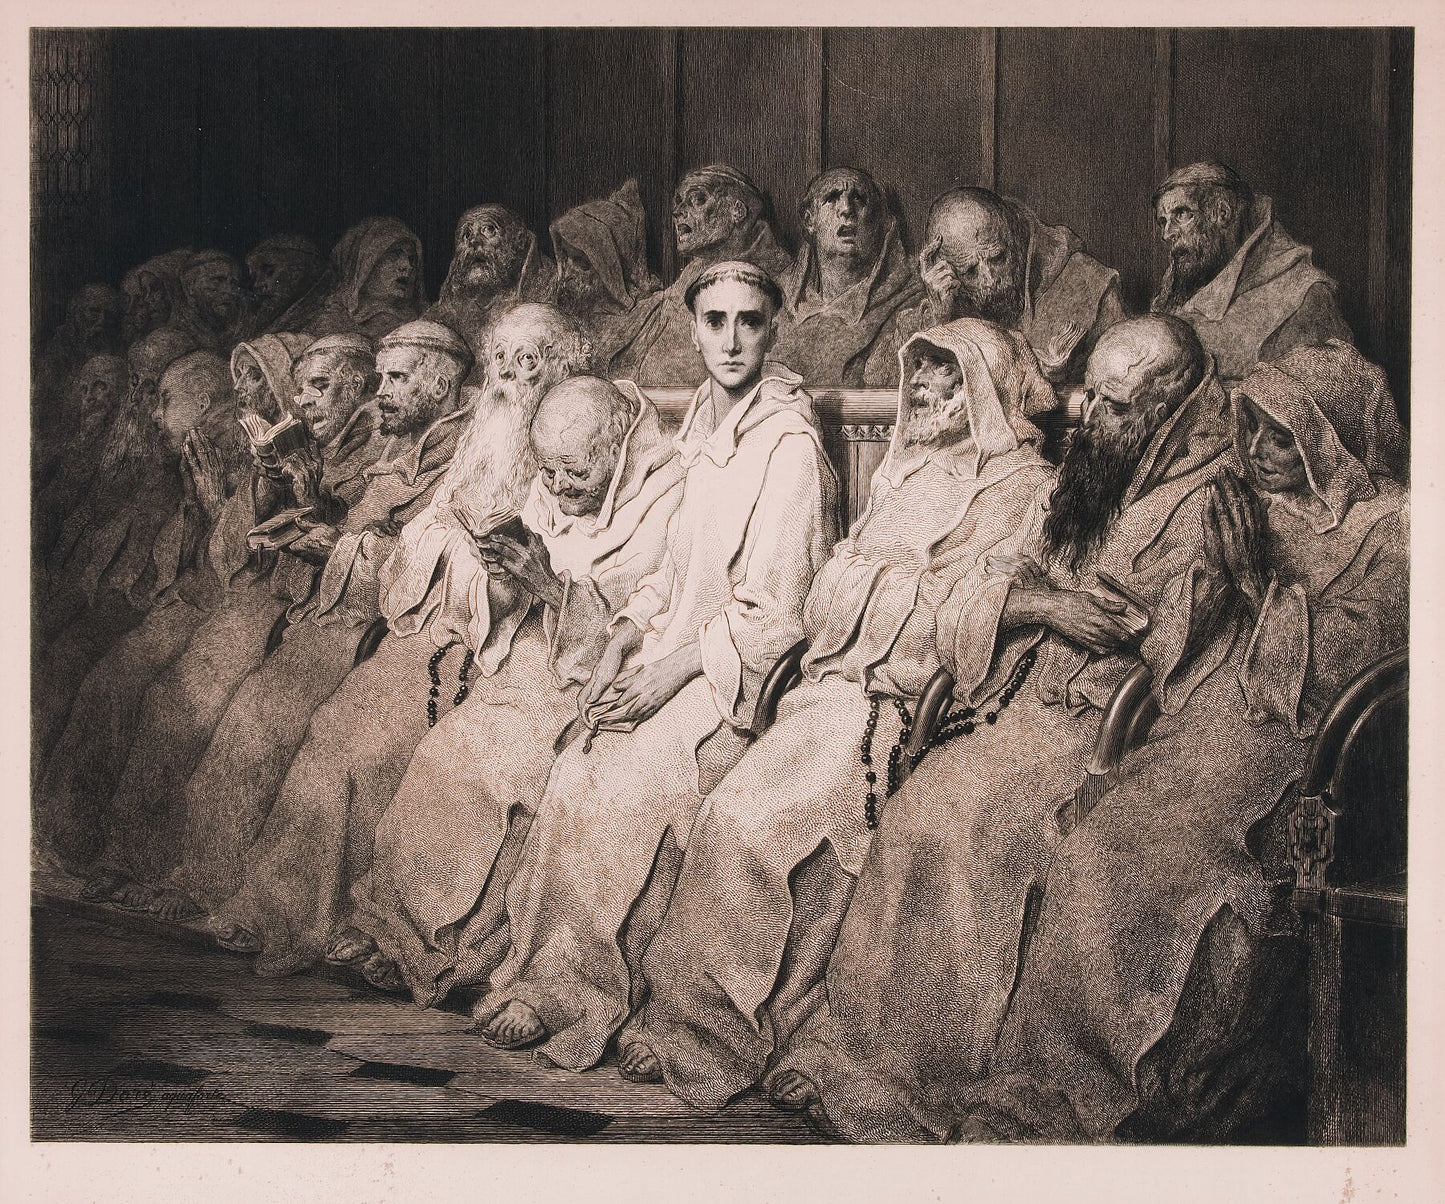 Le Neophyte by Gustave Doré - 1877–1880